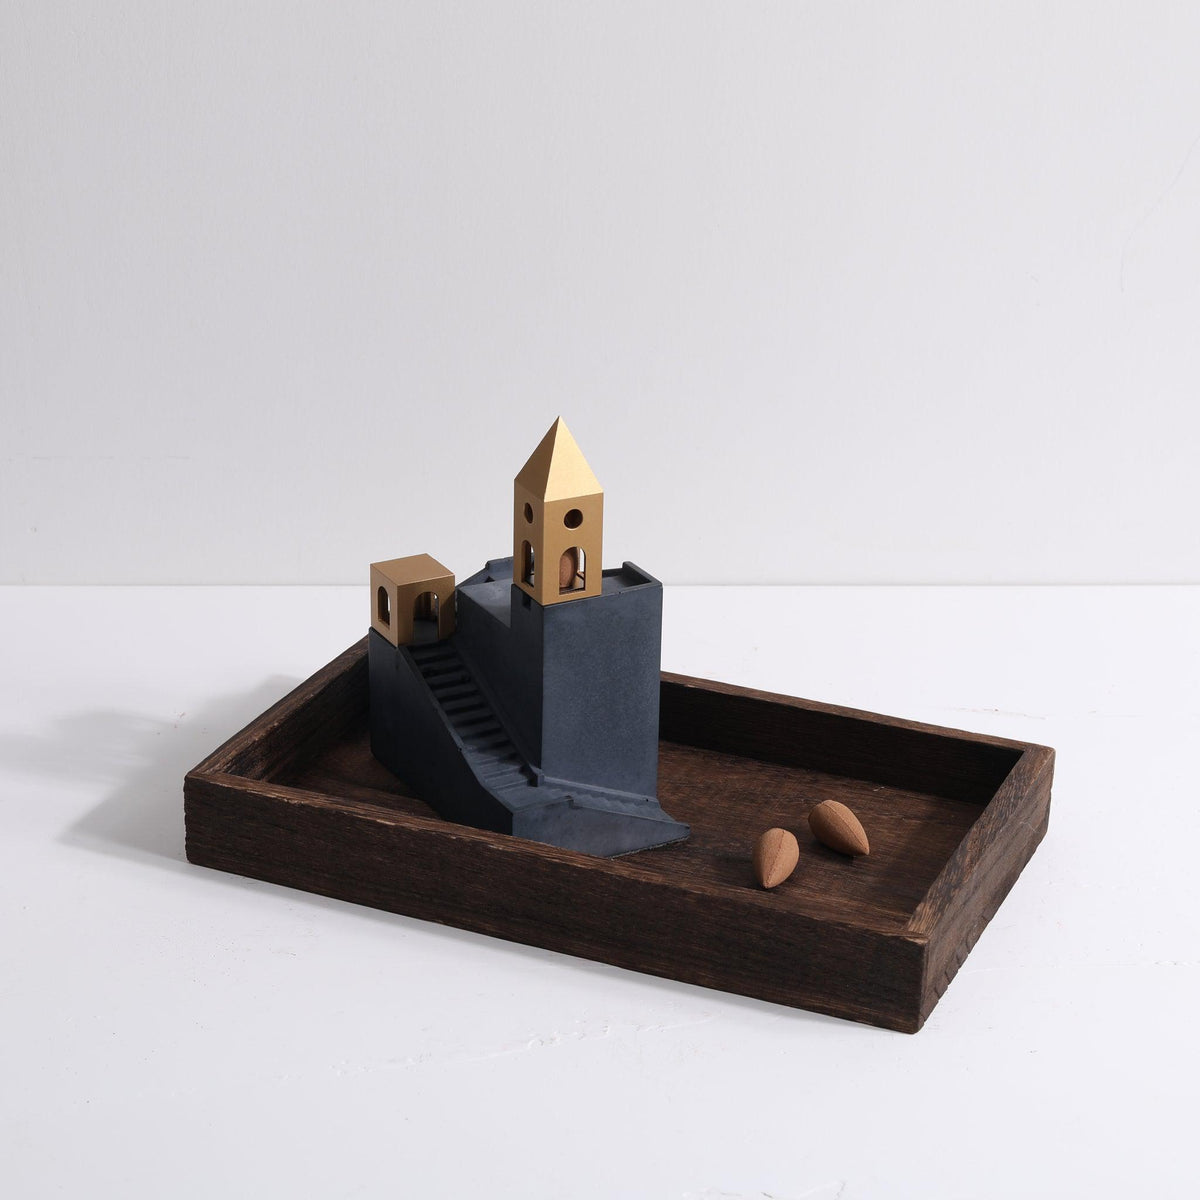 Cloud Keep Incense Fountain by Kin Objects on a Wooden Tray with Incense